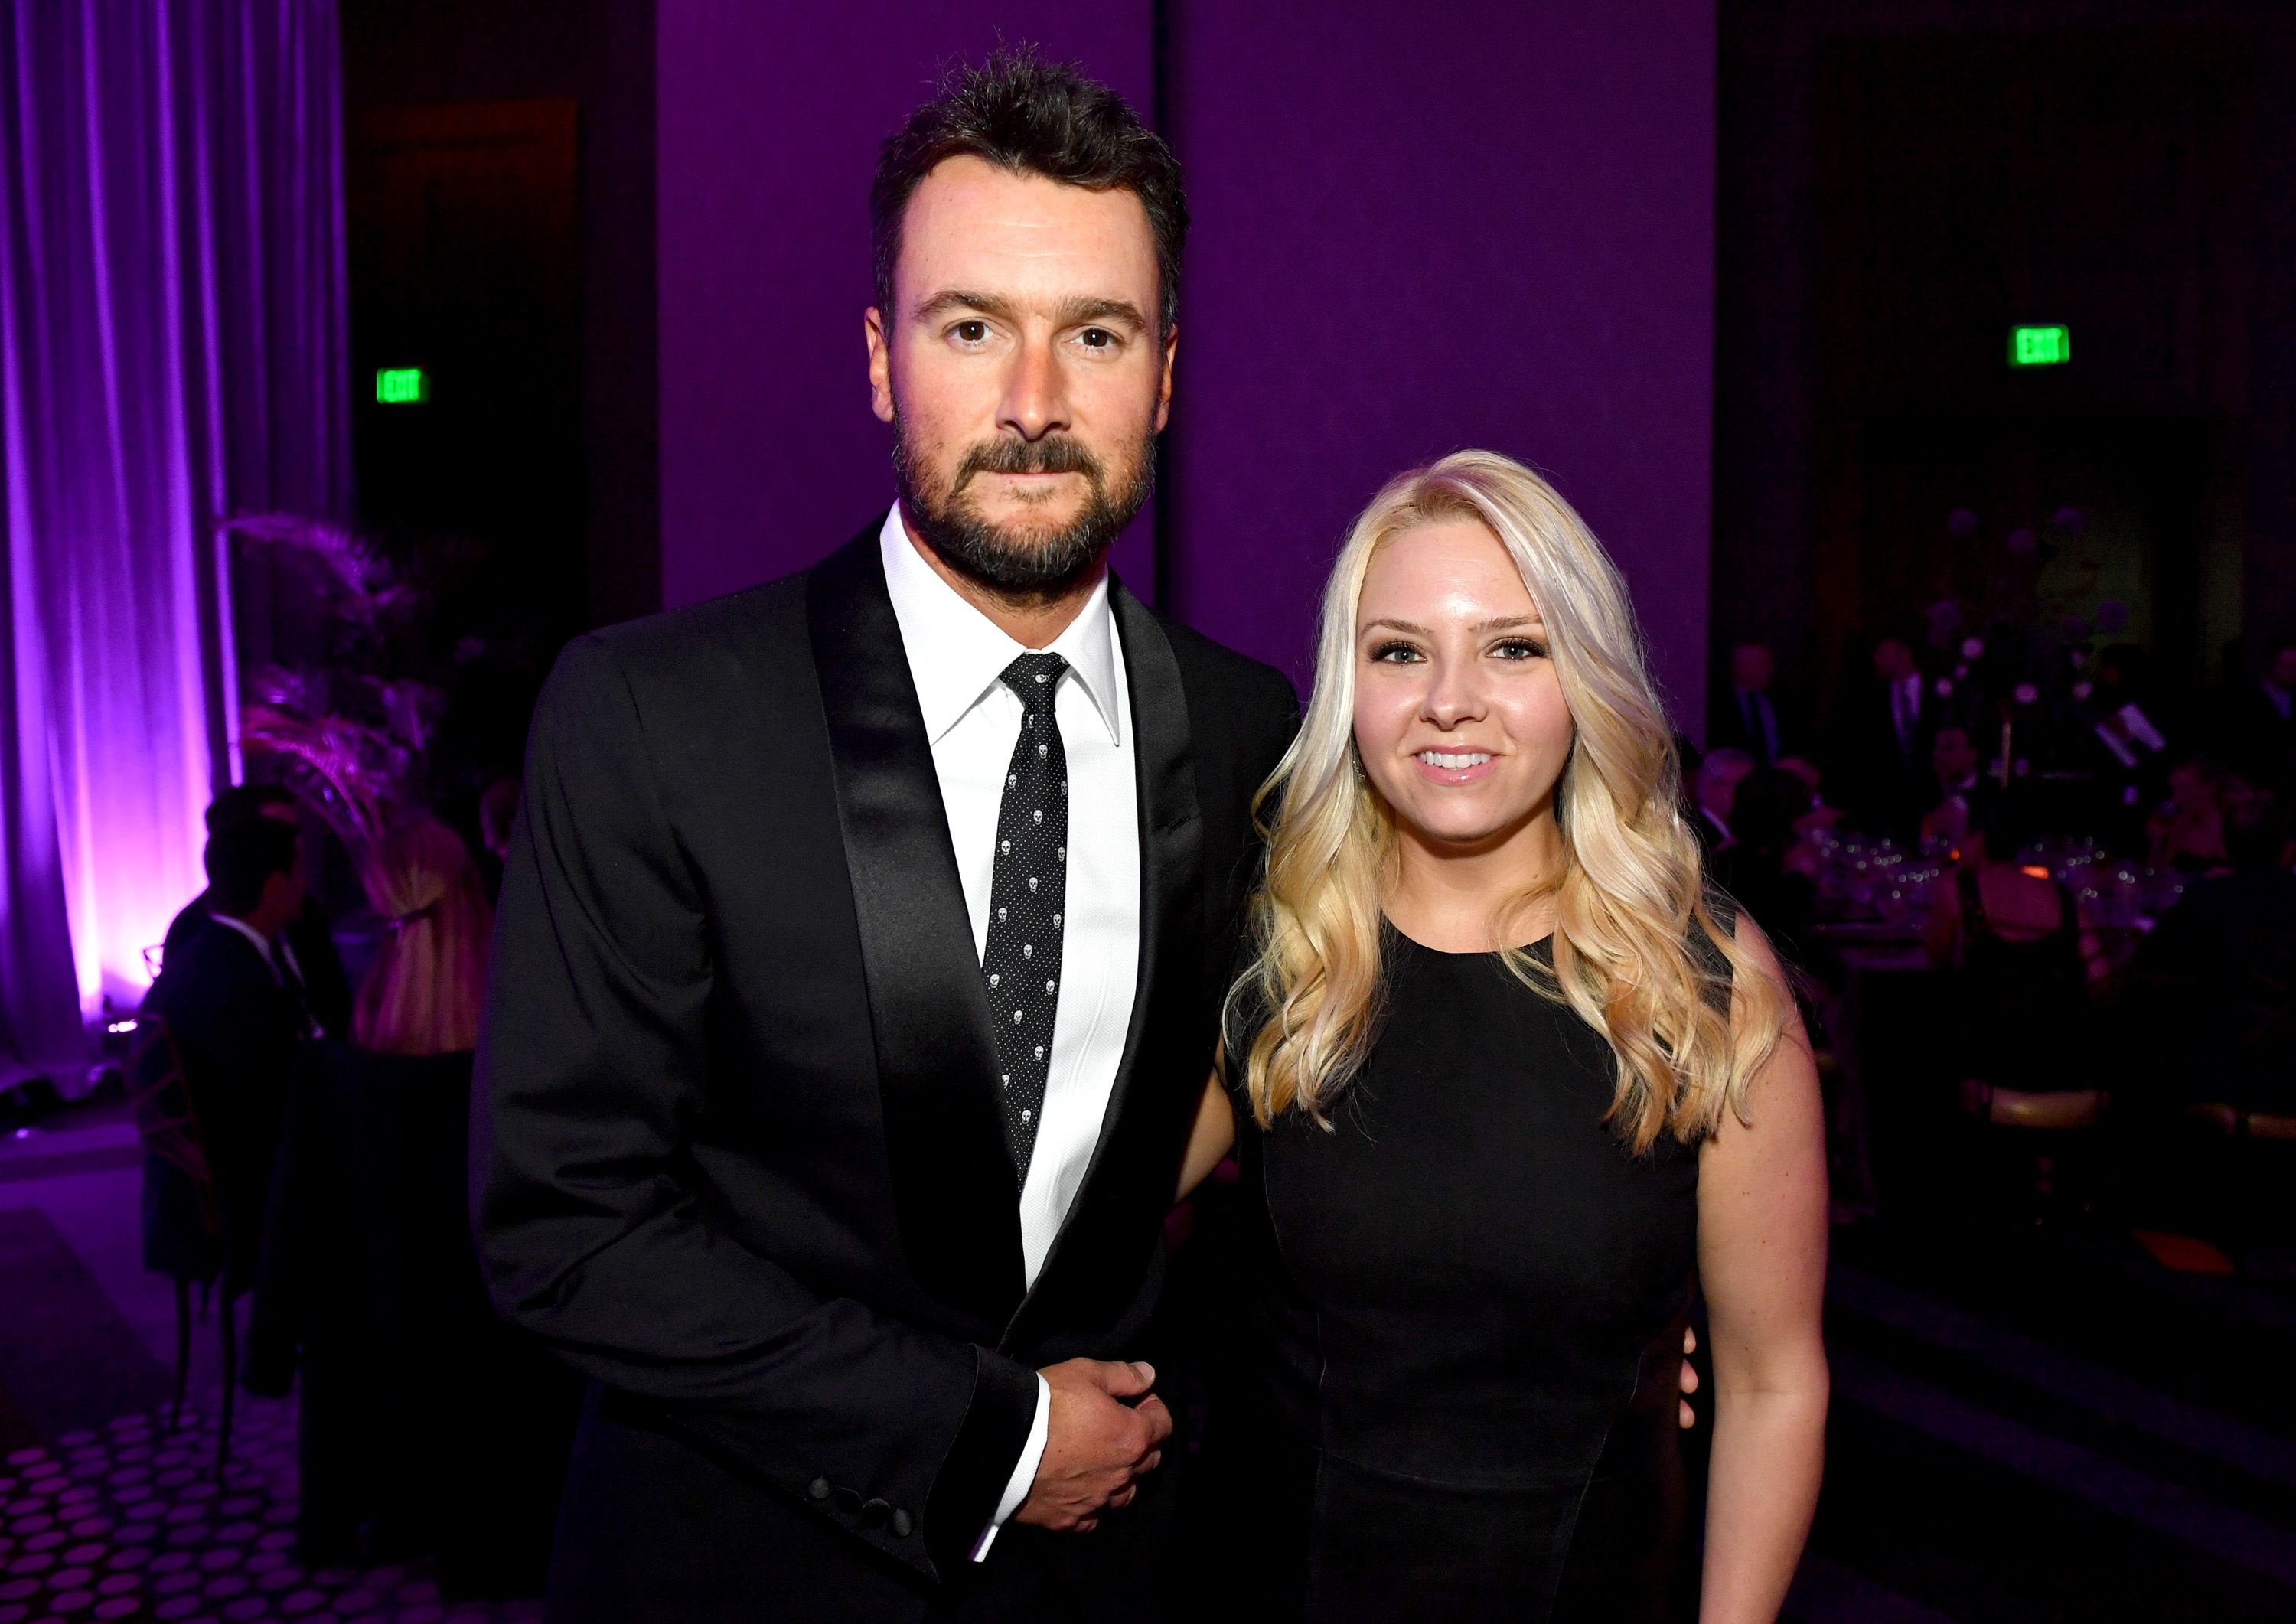 Eric Church and Katherine Blasingame Church at Best Cellars Wine Dinner on April 24, 2017, in Nashville, Tennessee | Photo: Jason Davis/Getty Images